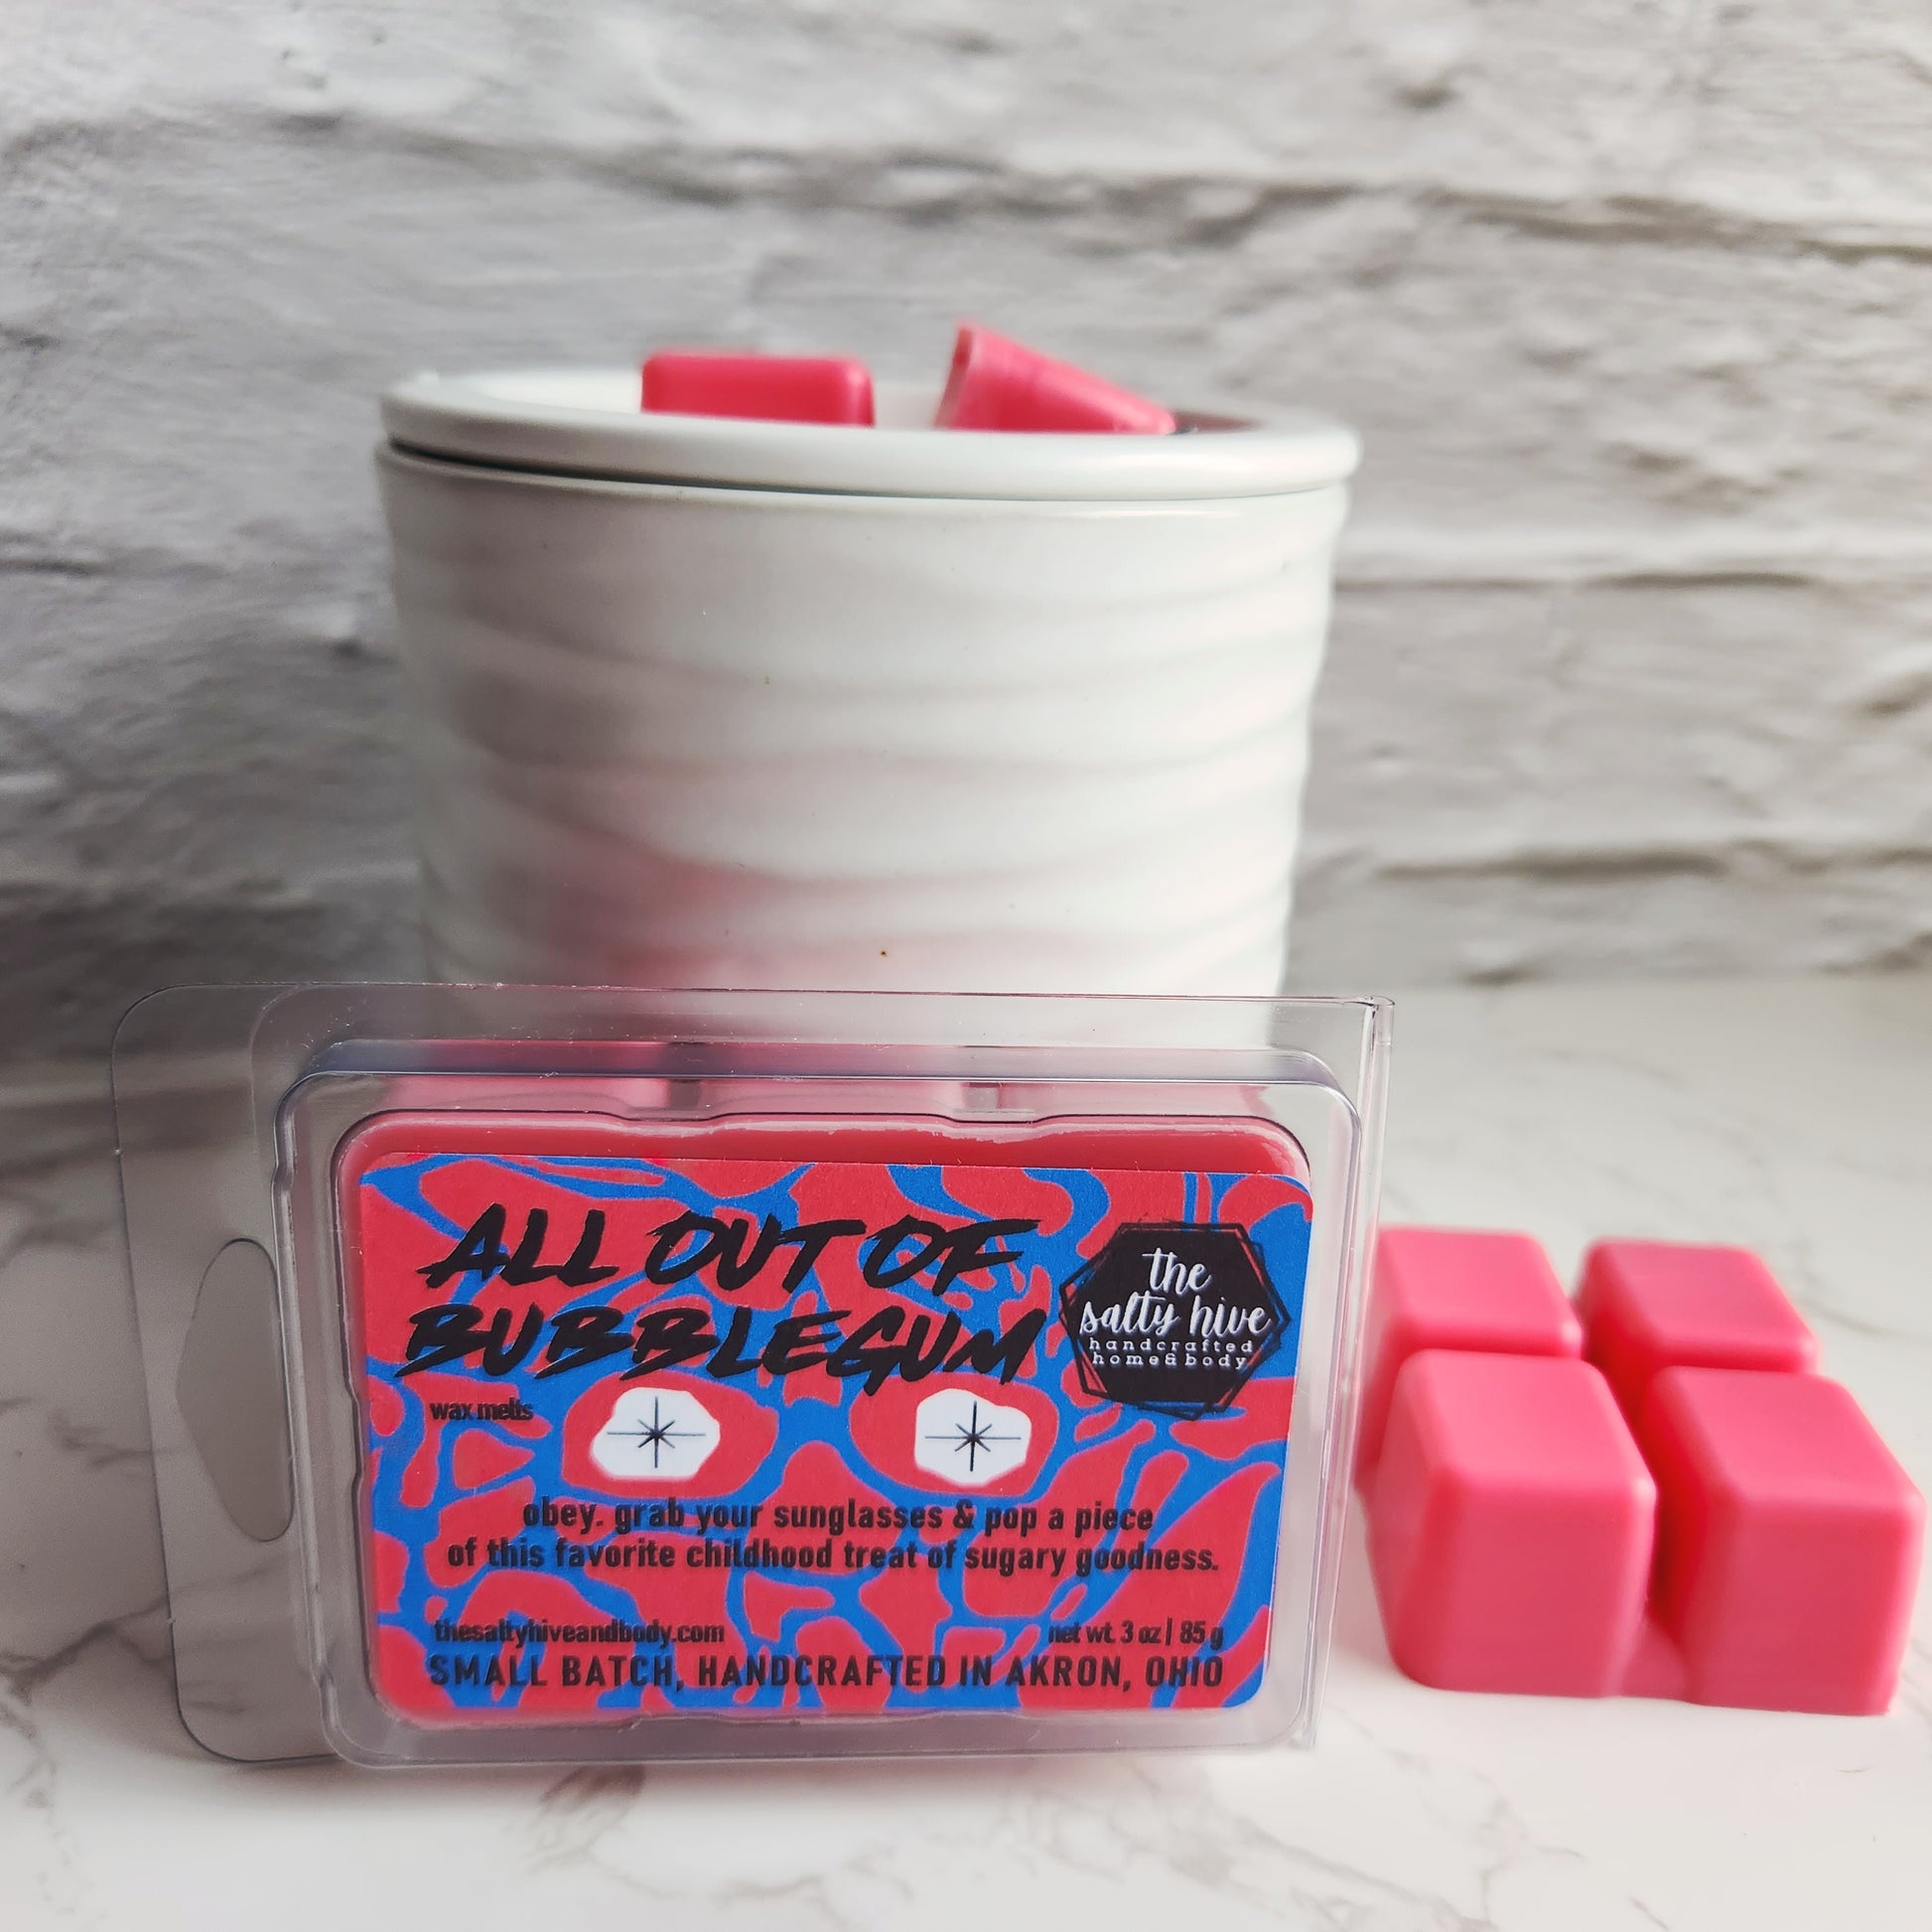 all out of bubblegum wax melts - the salty hive